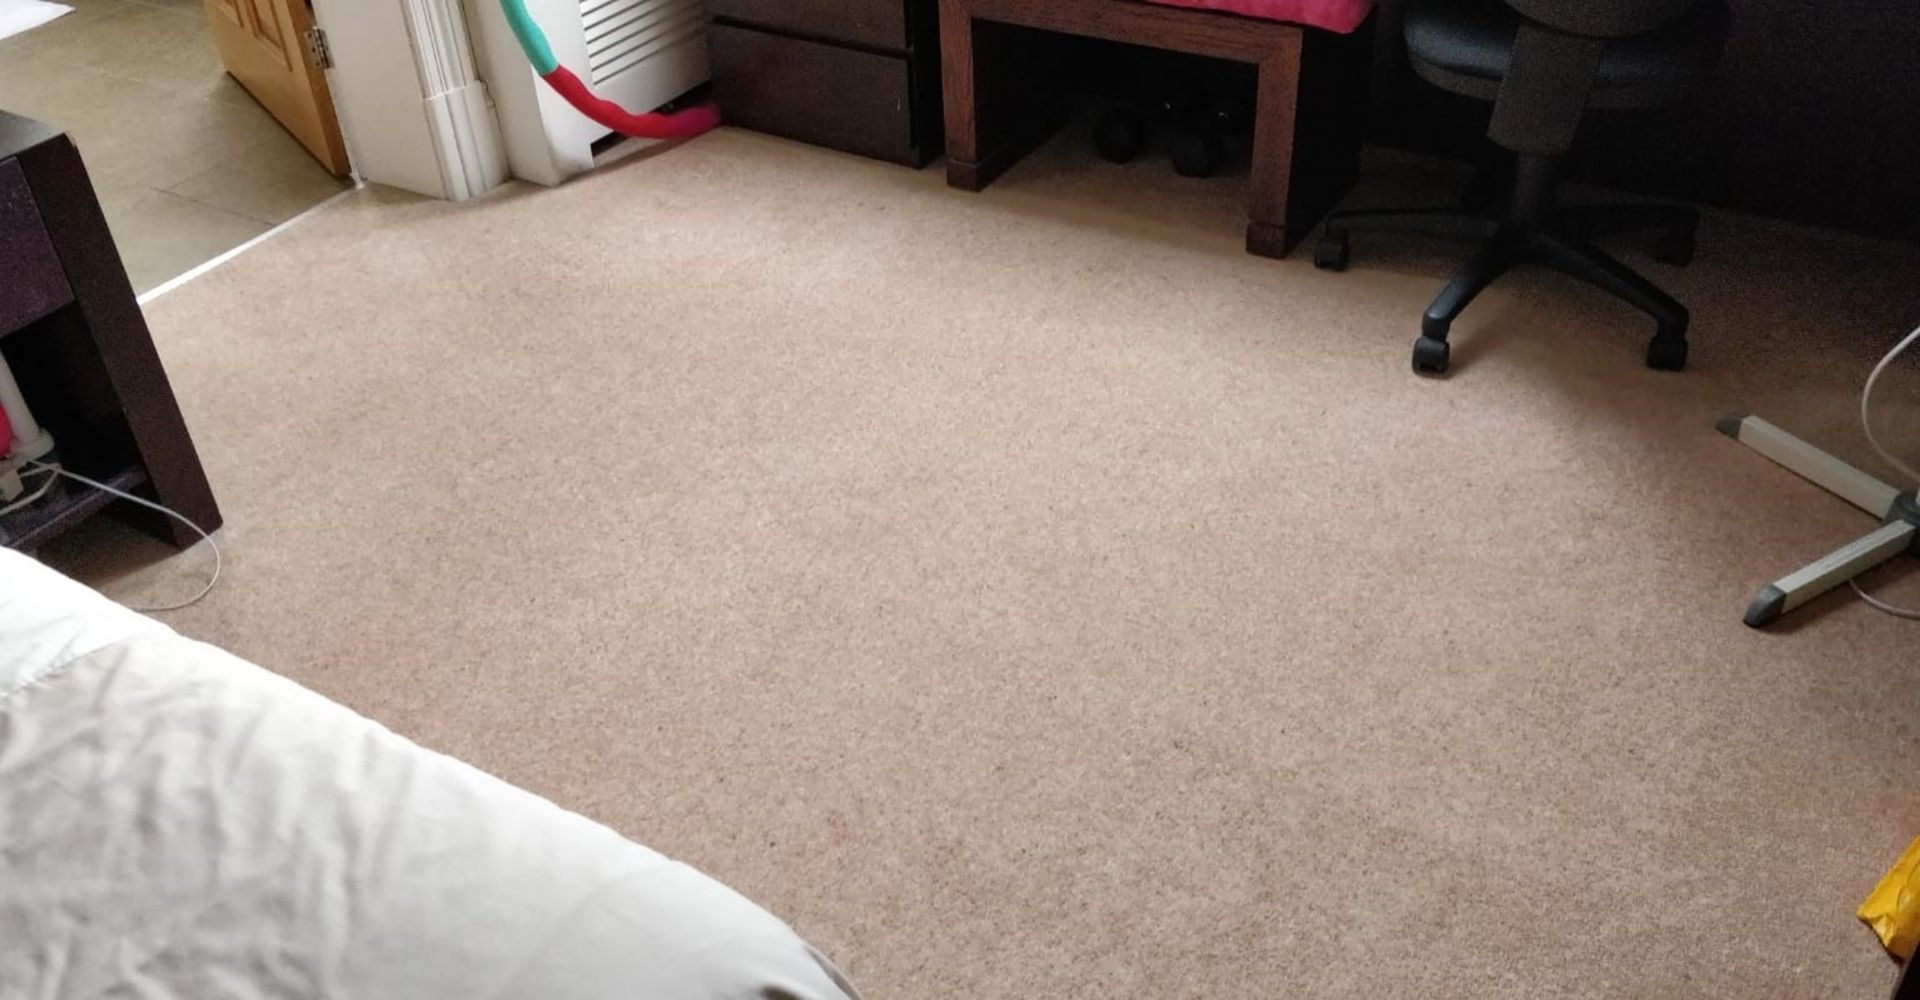 2 x Sections Of Premium Bedroom Carpet In A Pale Neutral Tone - Dimensions: 720 x 280cm Each